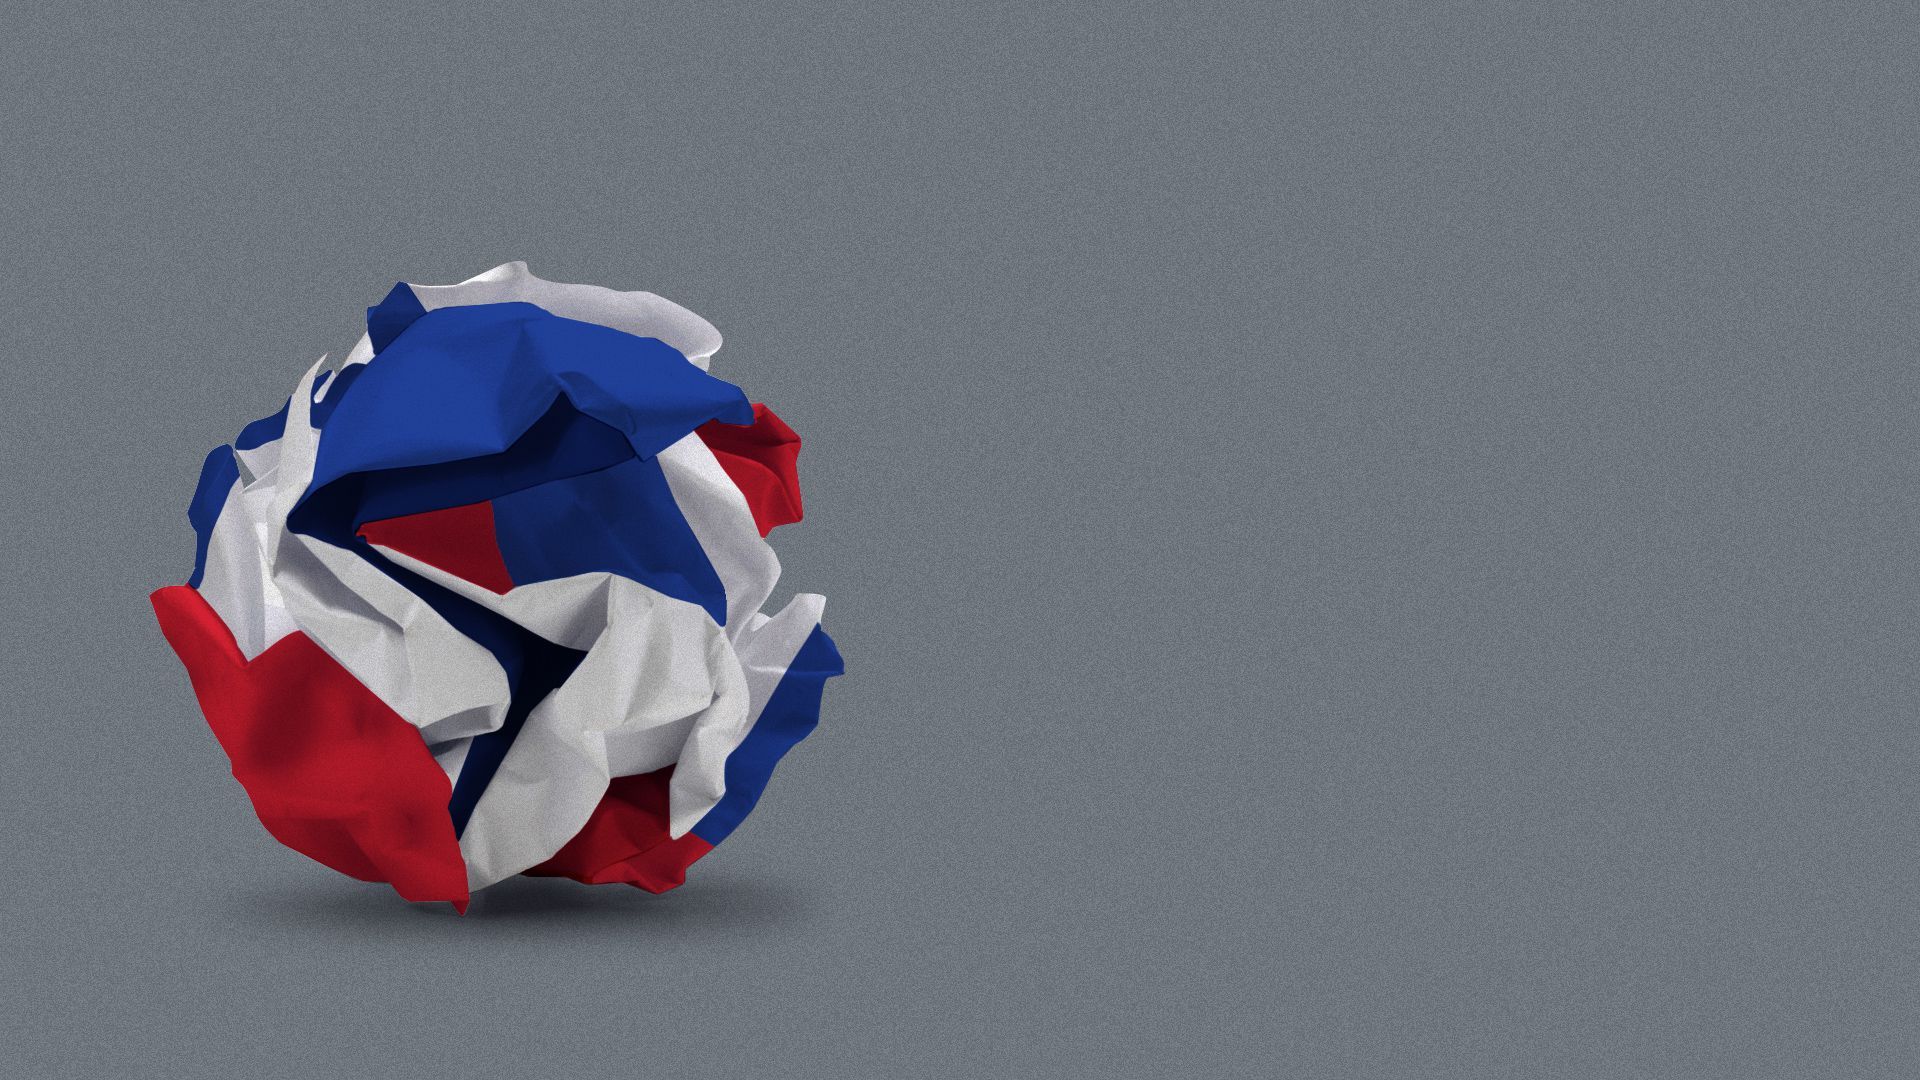 Illustration of a Russian flag crumpled up into a ball.  